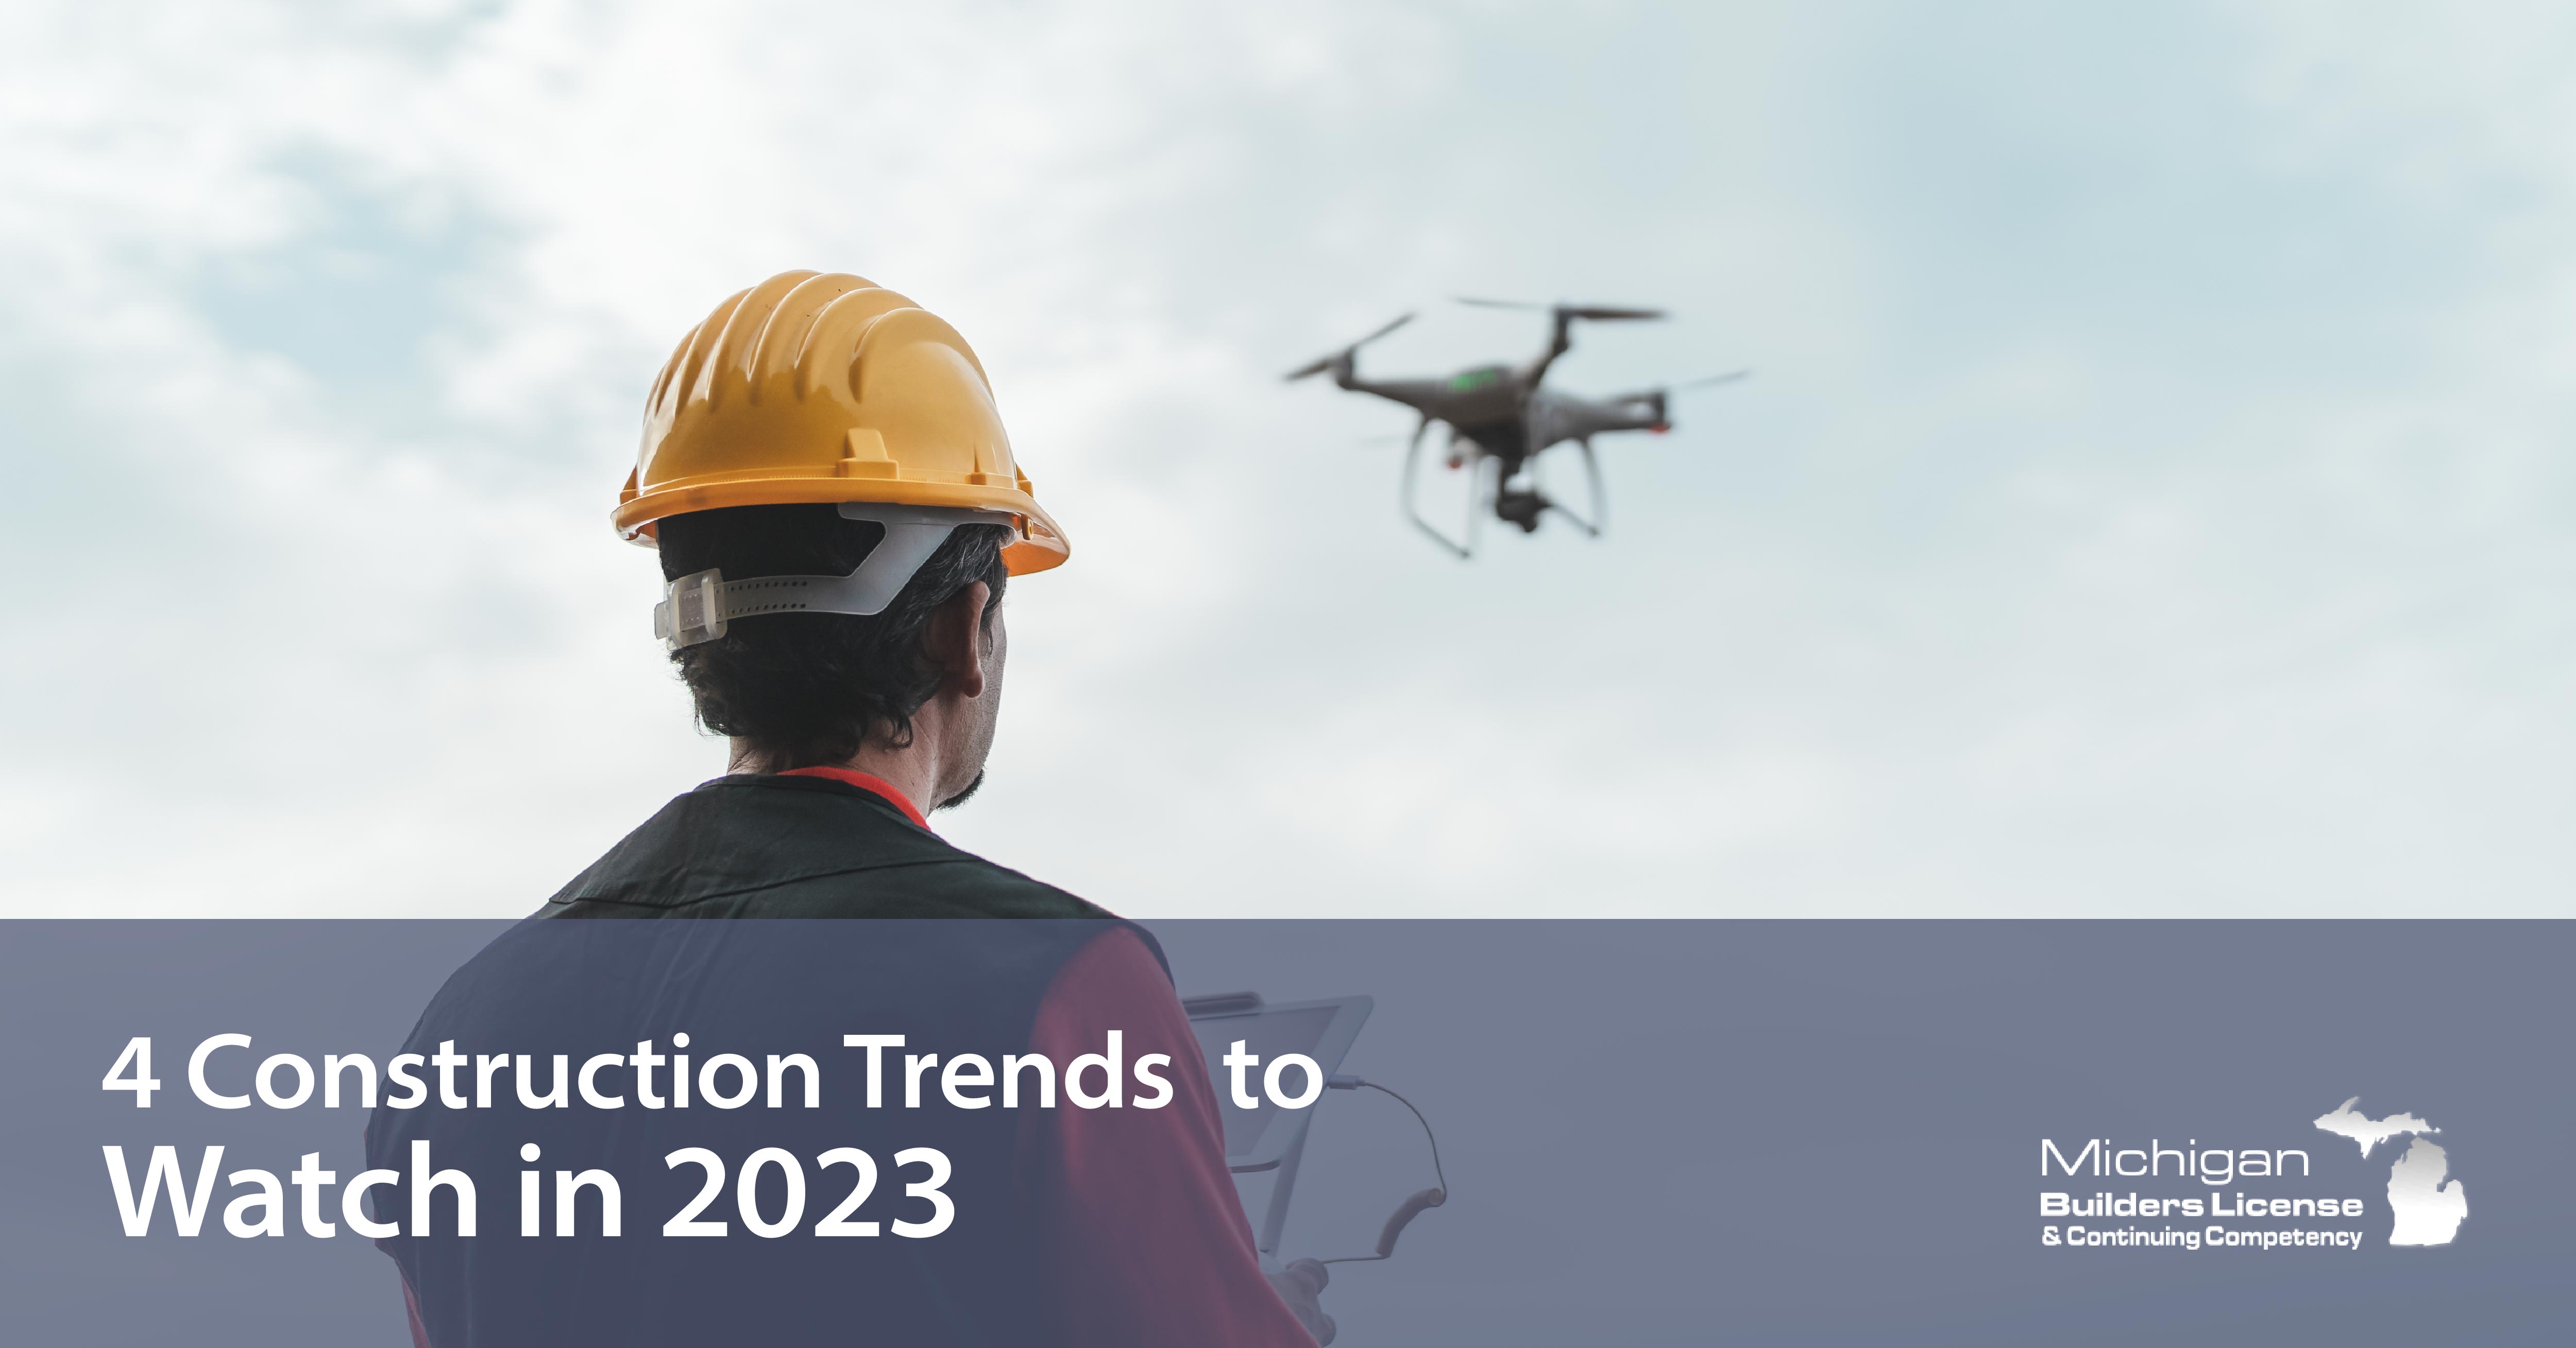 4 Construction Trends to Watch in 2023